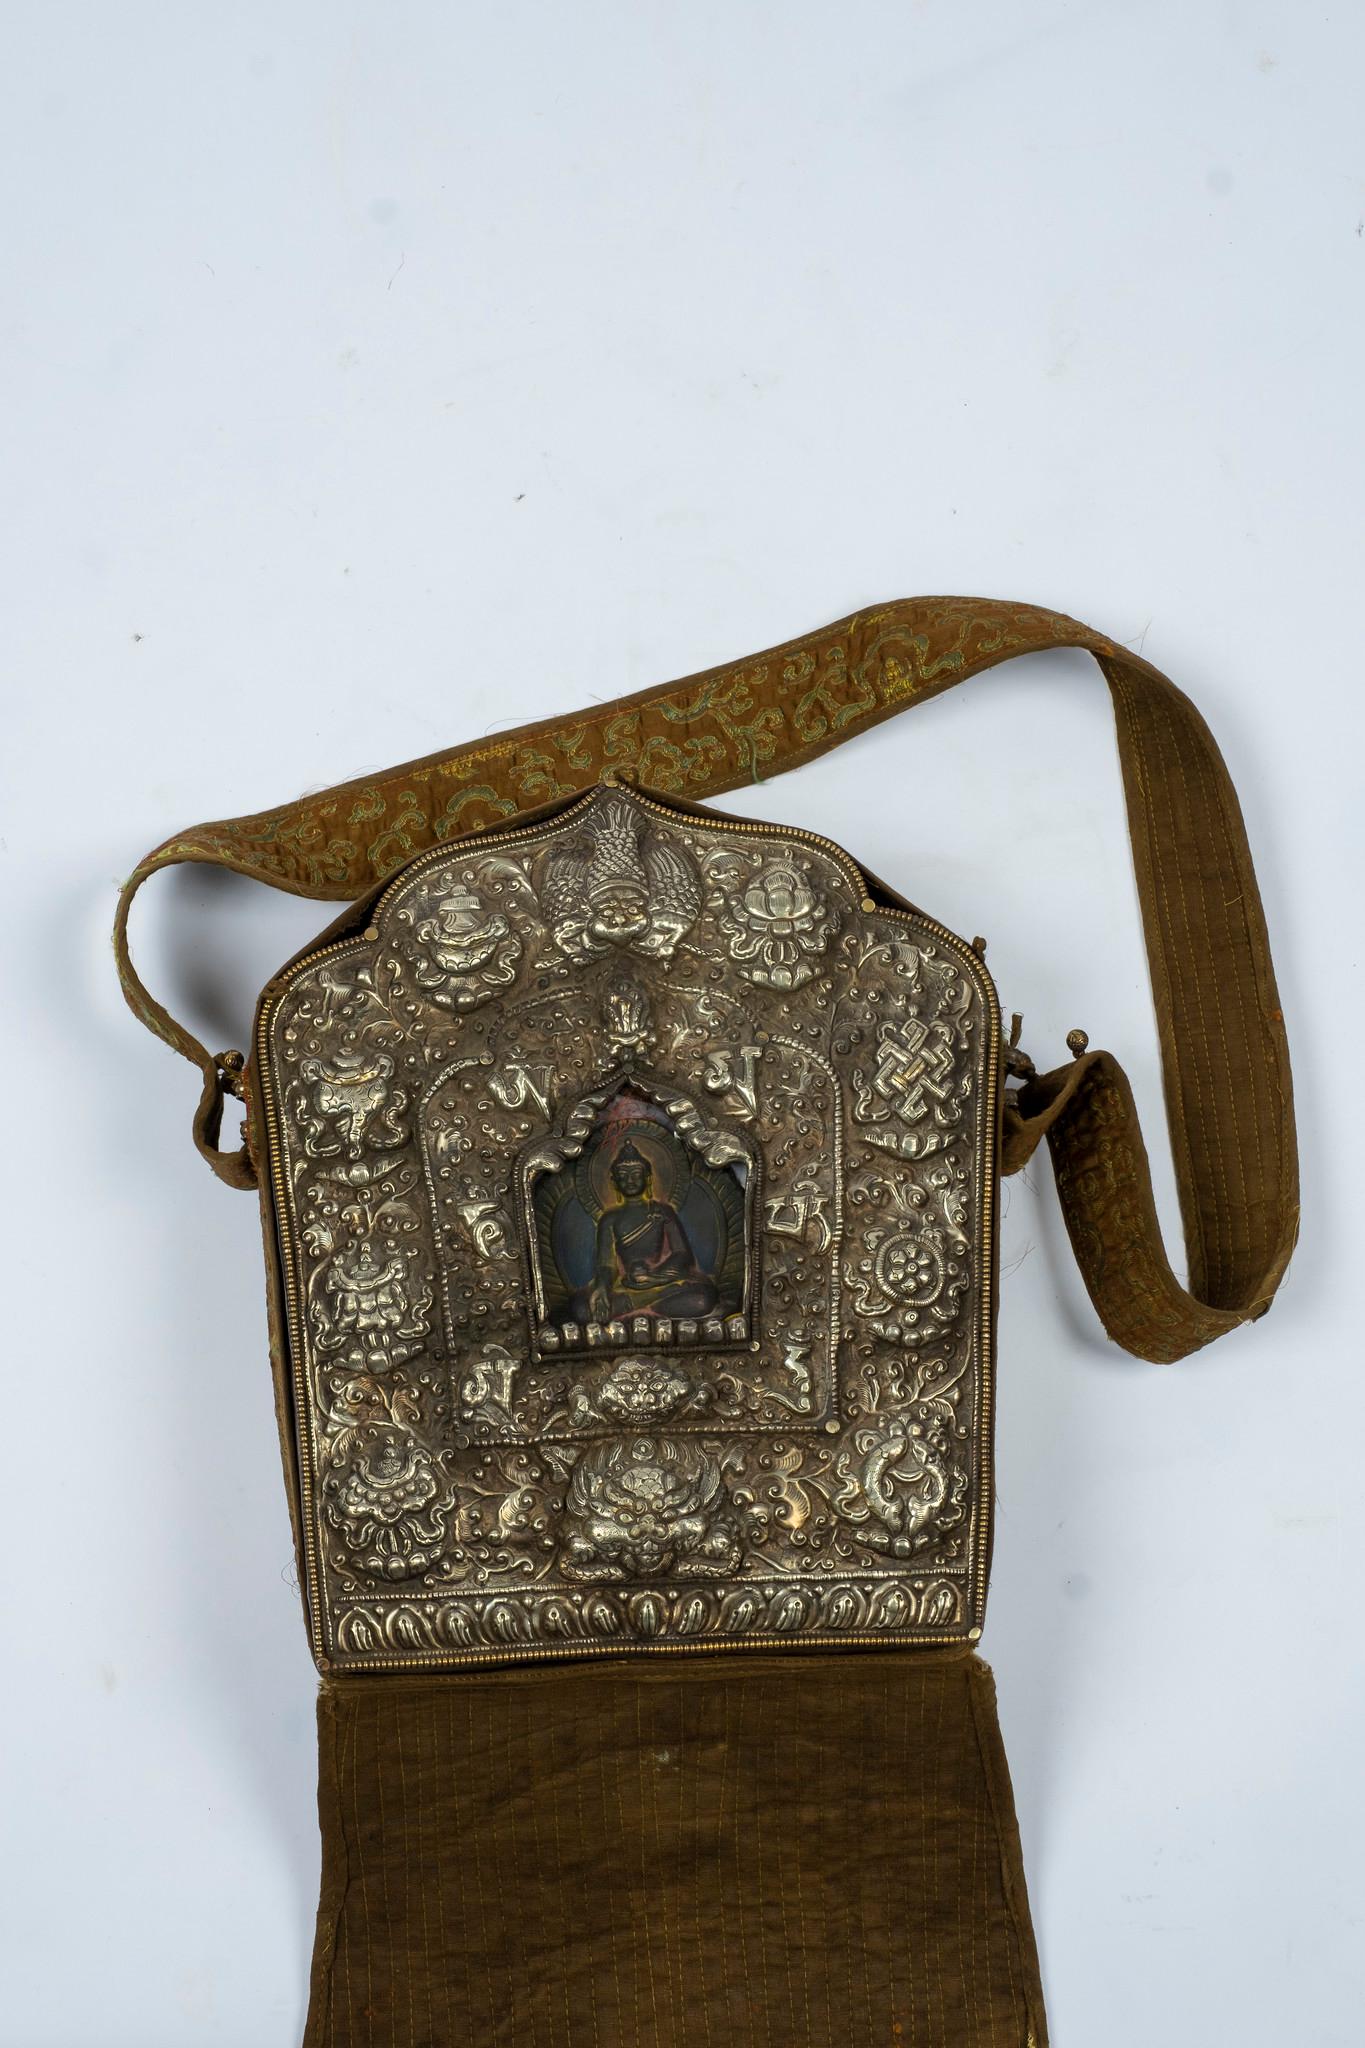 A large antique Tibetan Buddha shrine or prayer box (also known as Gau) which encases a painted terracotta Buddha figure, all wrapped in a hand embroidered quilted silk brocade. This was used as traveling shrine and carried on one's person when away